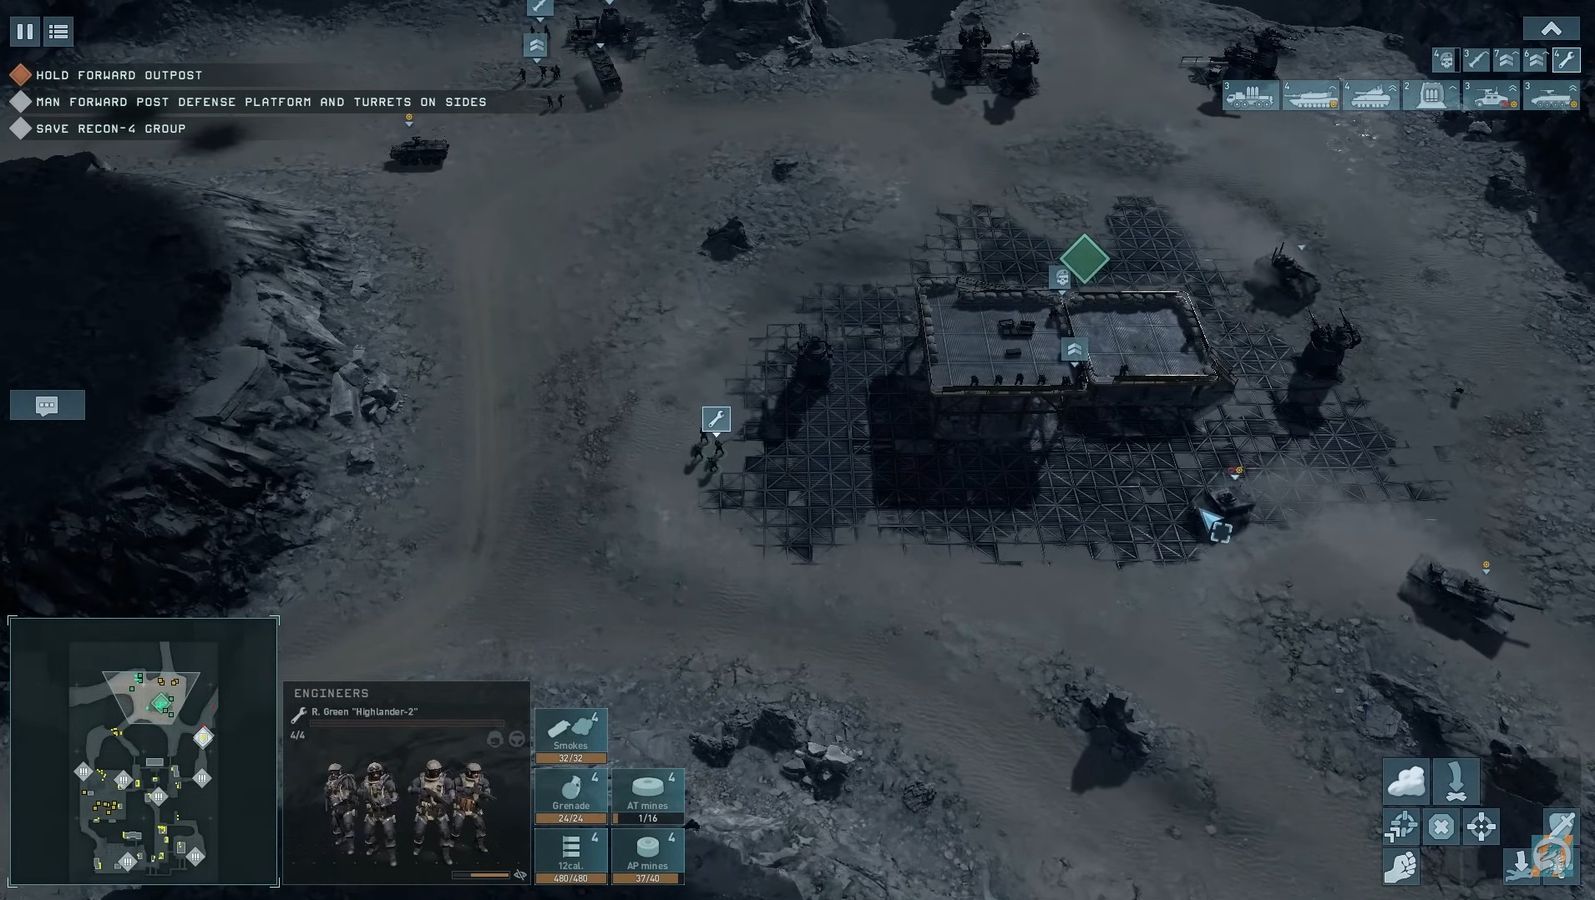 Gameplay of Terminator: Dark Fate - Defiance featuring a vast human army